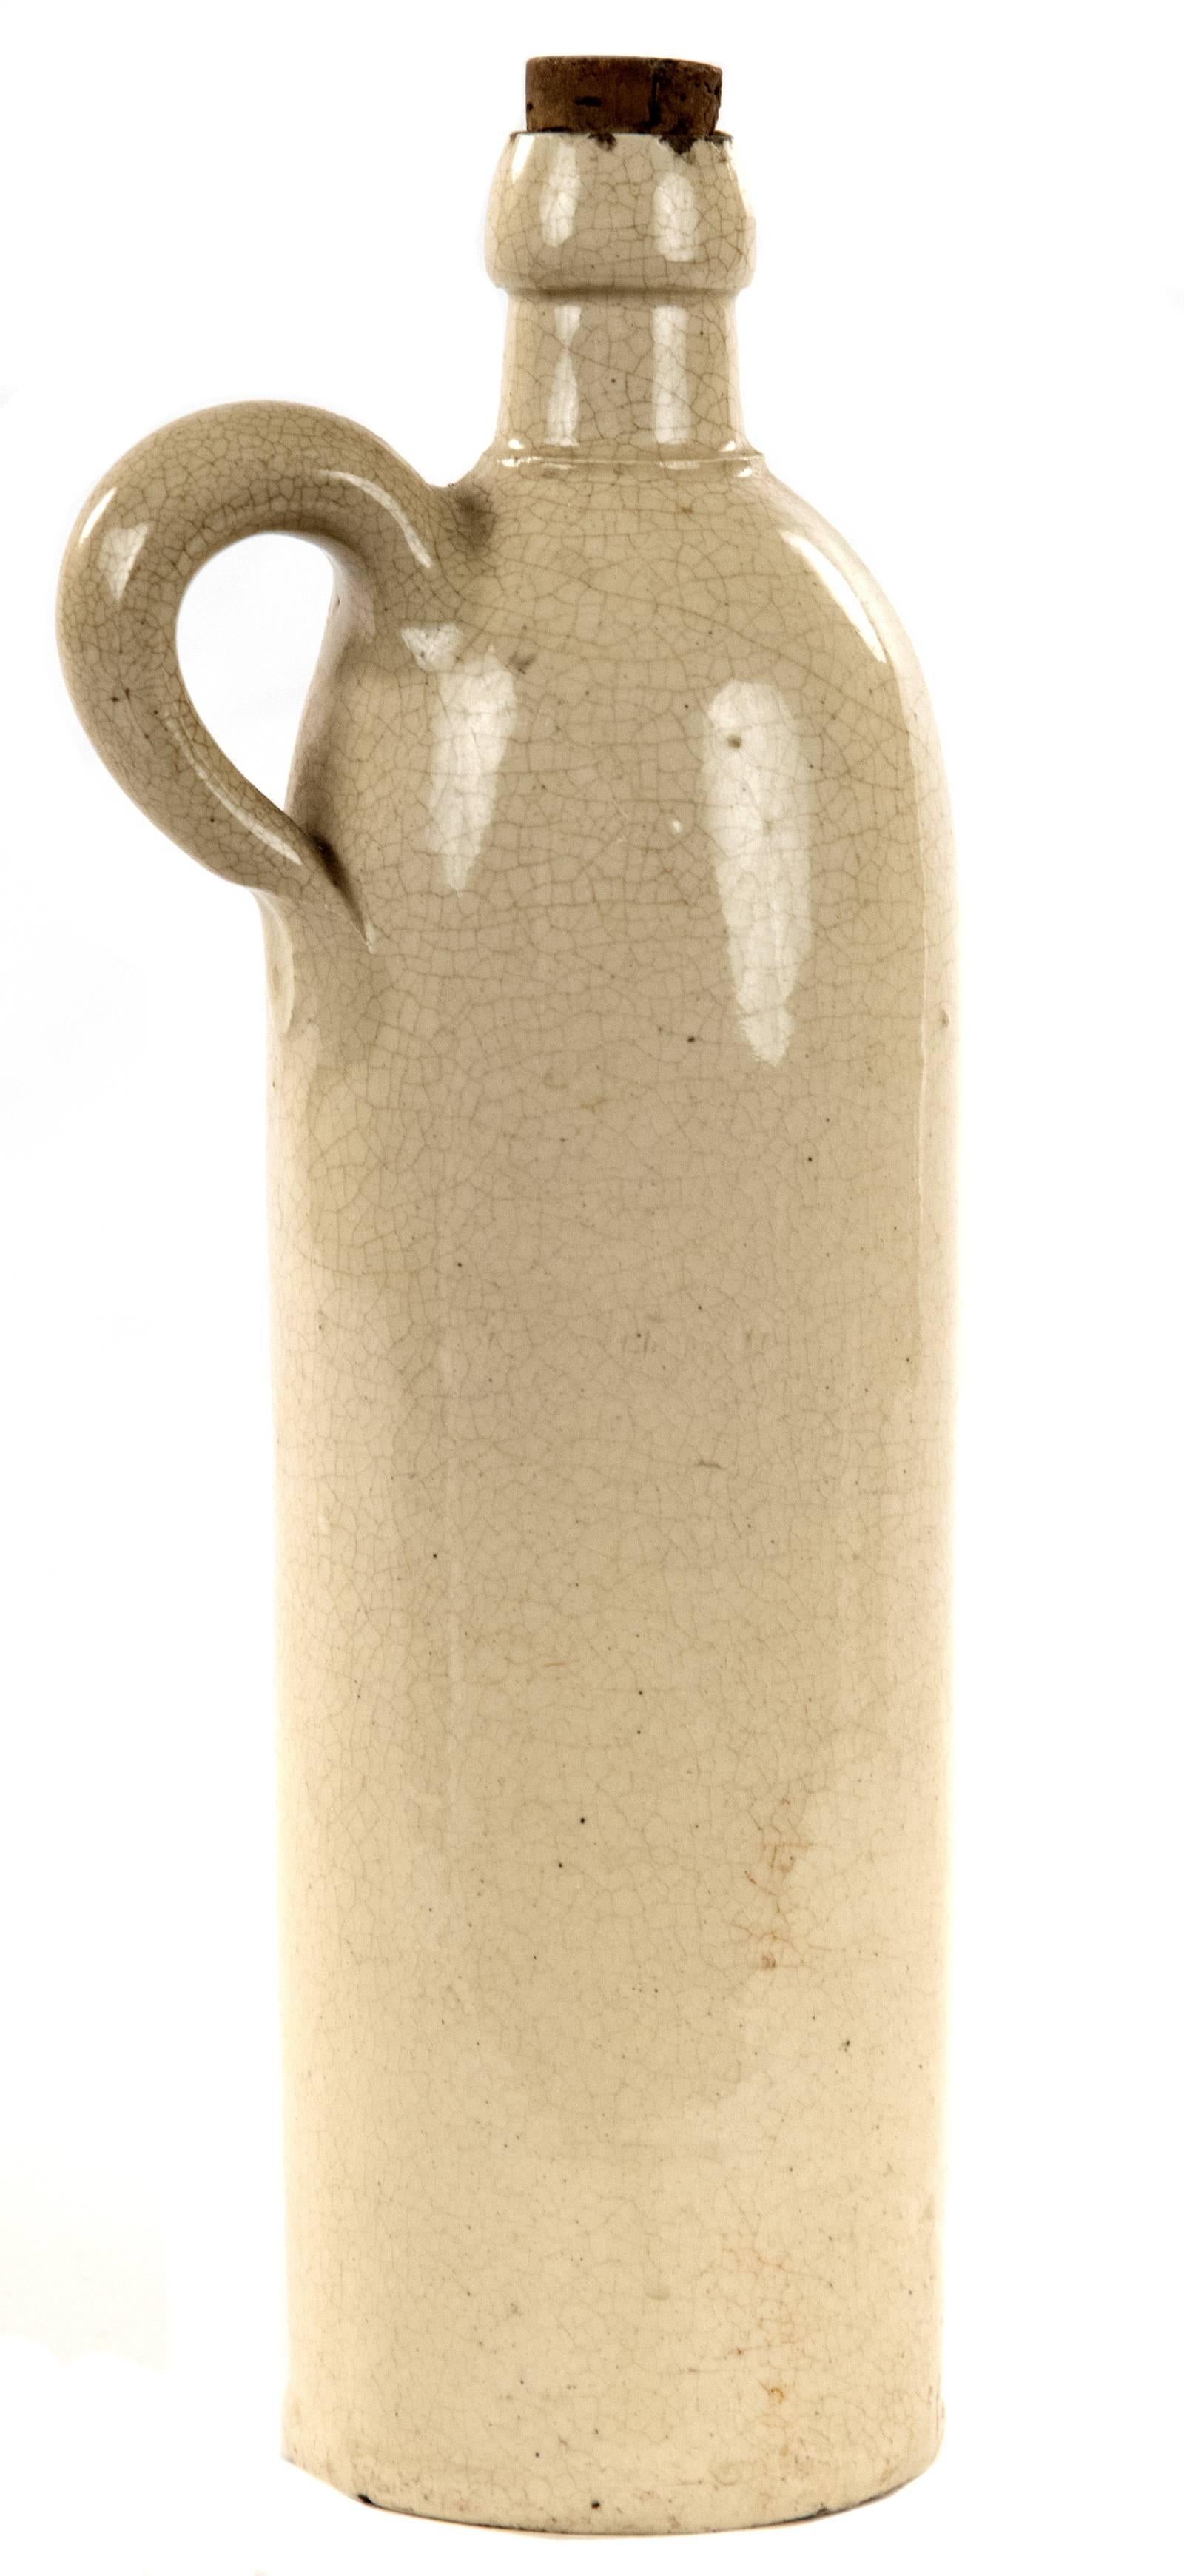 A German stoneware bottle of tall cylindrical form with a small handle on the shoulder, the neck fitted with a cork stopper, the surface covered with a craquelure glaze. These bottles were used throughout the nineteenth century to transport